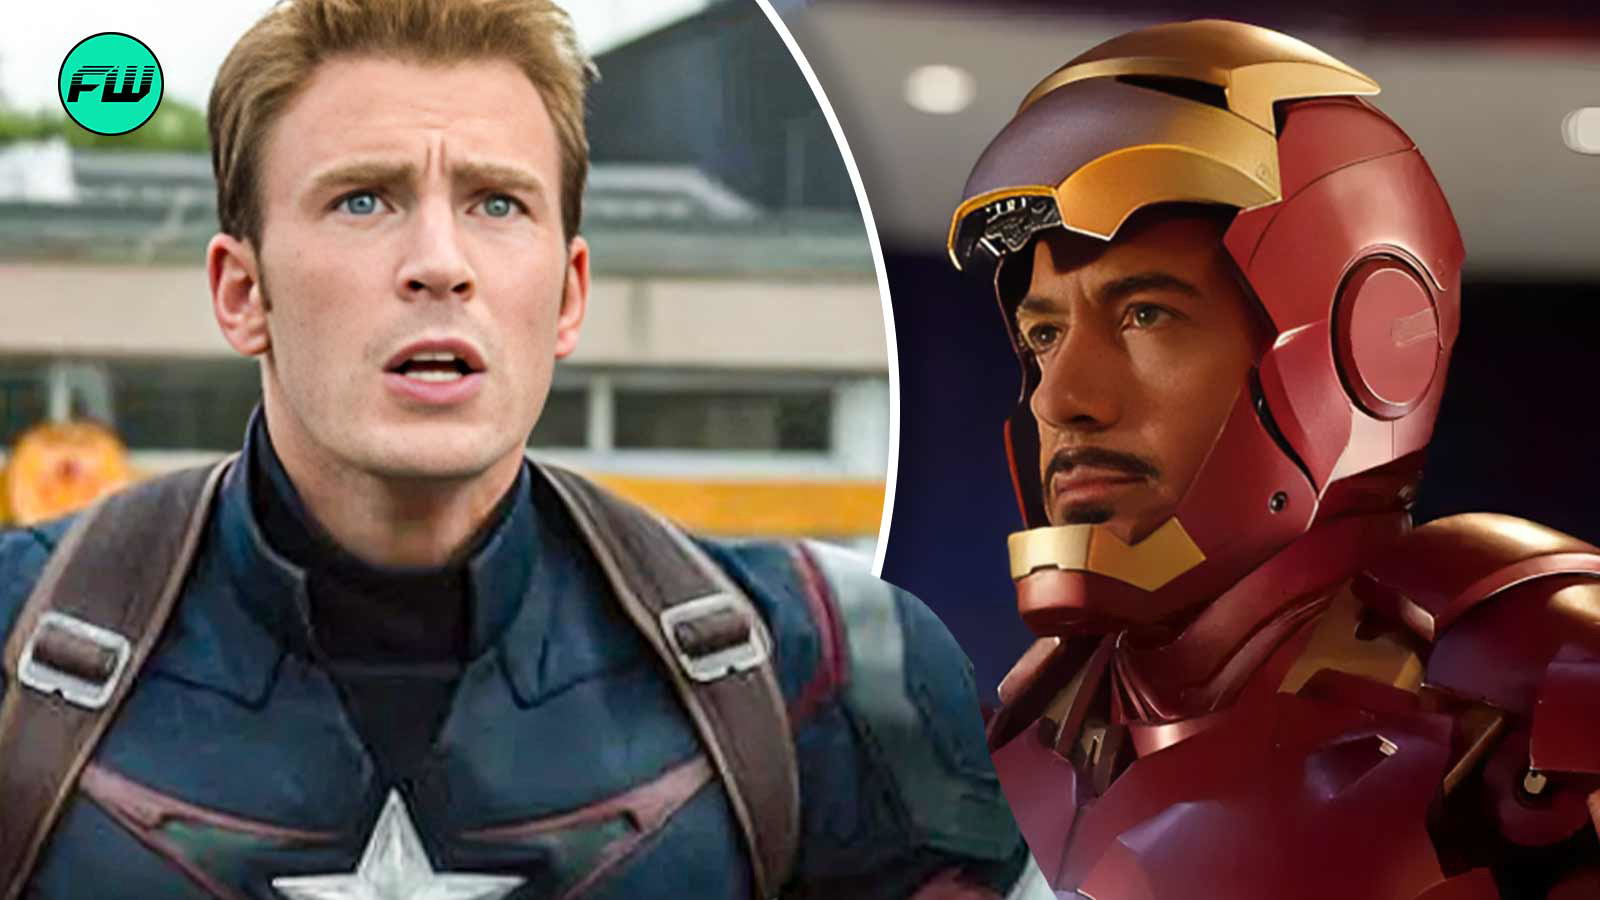 “He’s obviously lying”: Chris Evans Has Different Plans Than Robert Downey Jr. Over His MCU Return But Fans Don’t Believe the Captain America Star